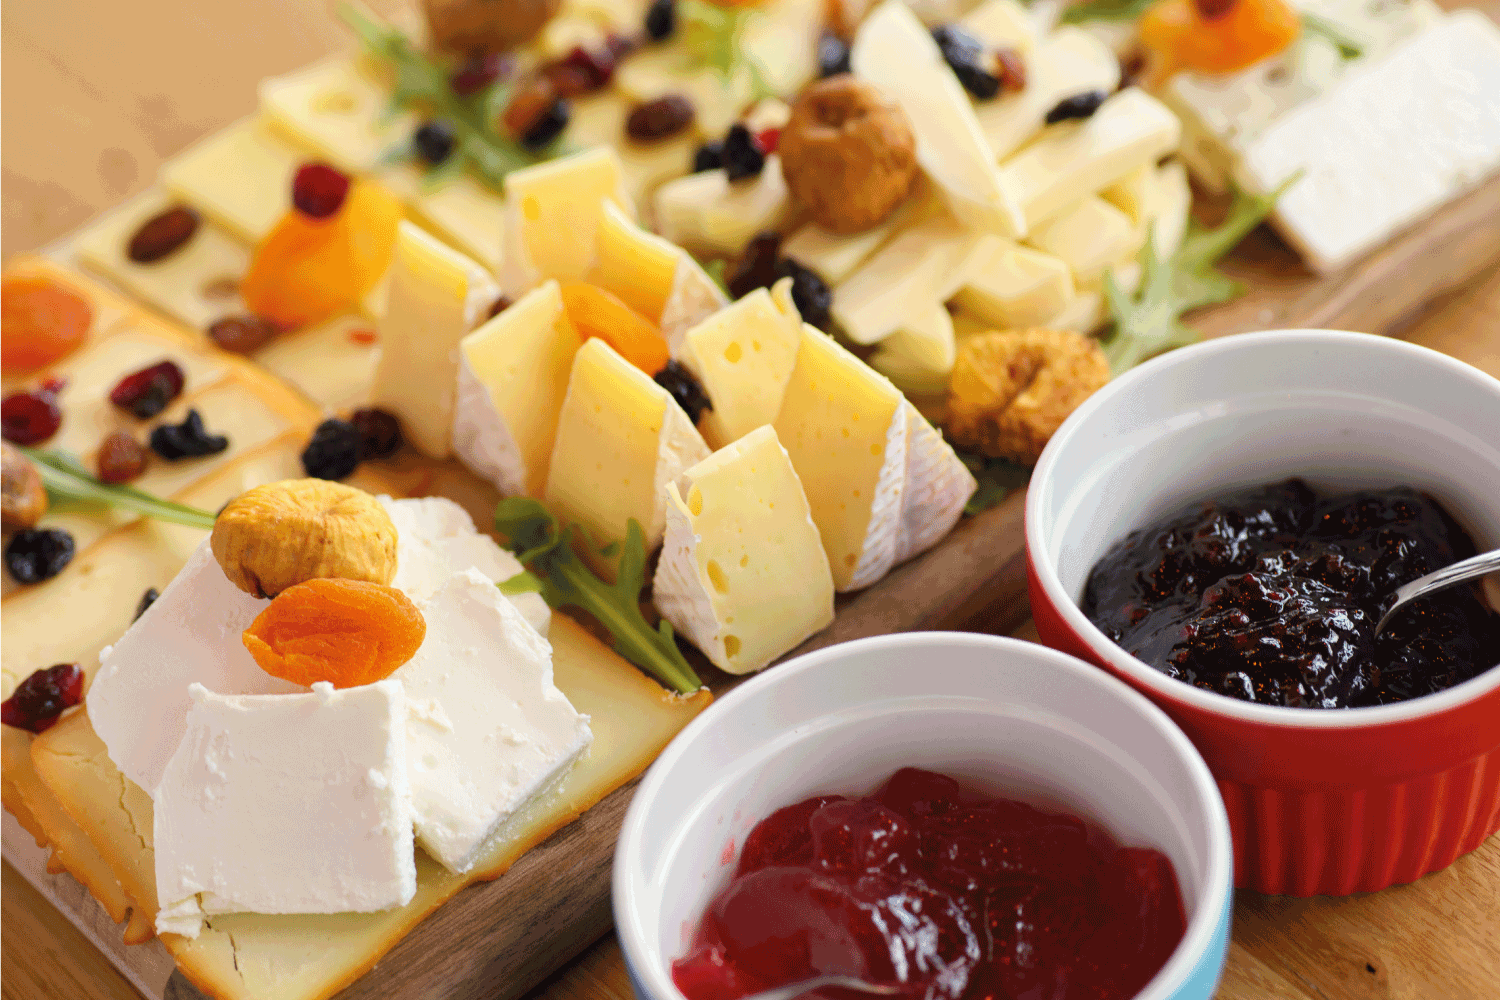 Cheese board with various types cheese, dried fruit and jam